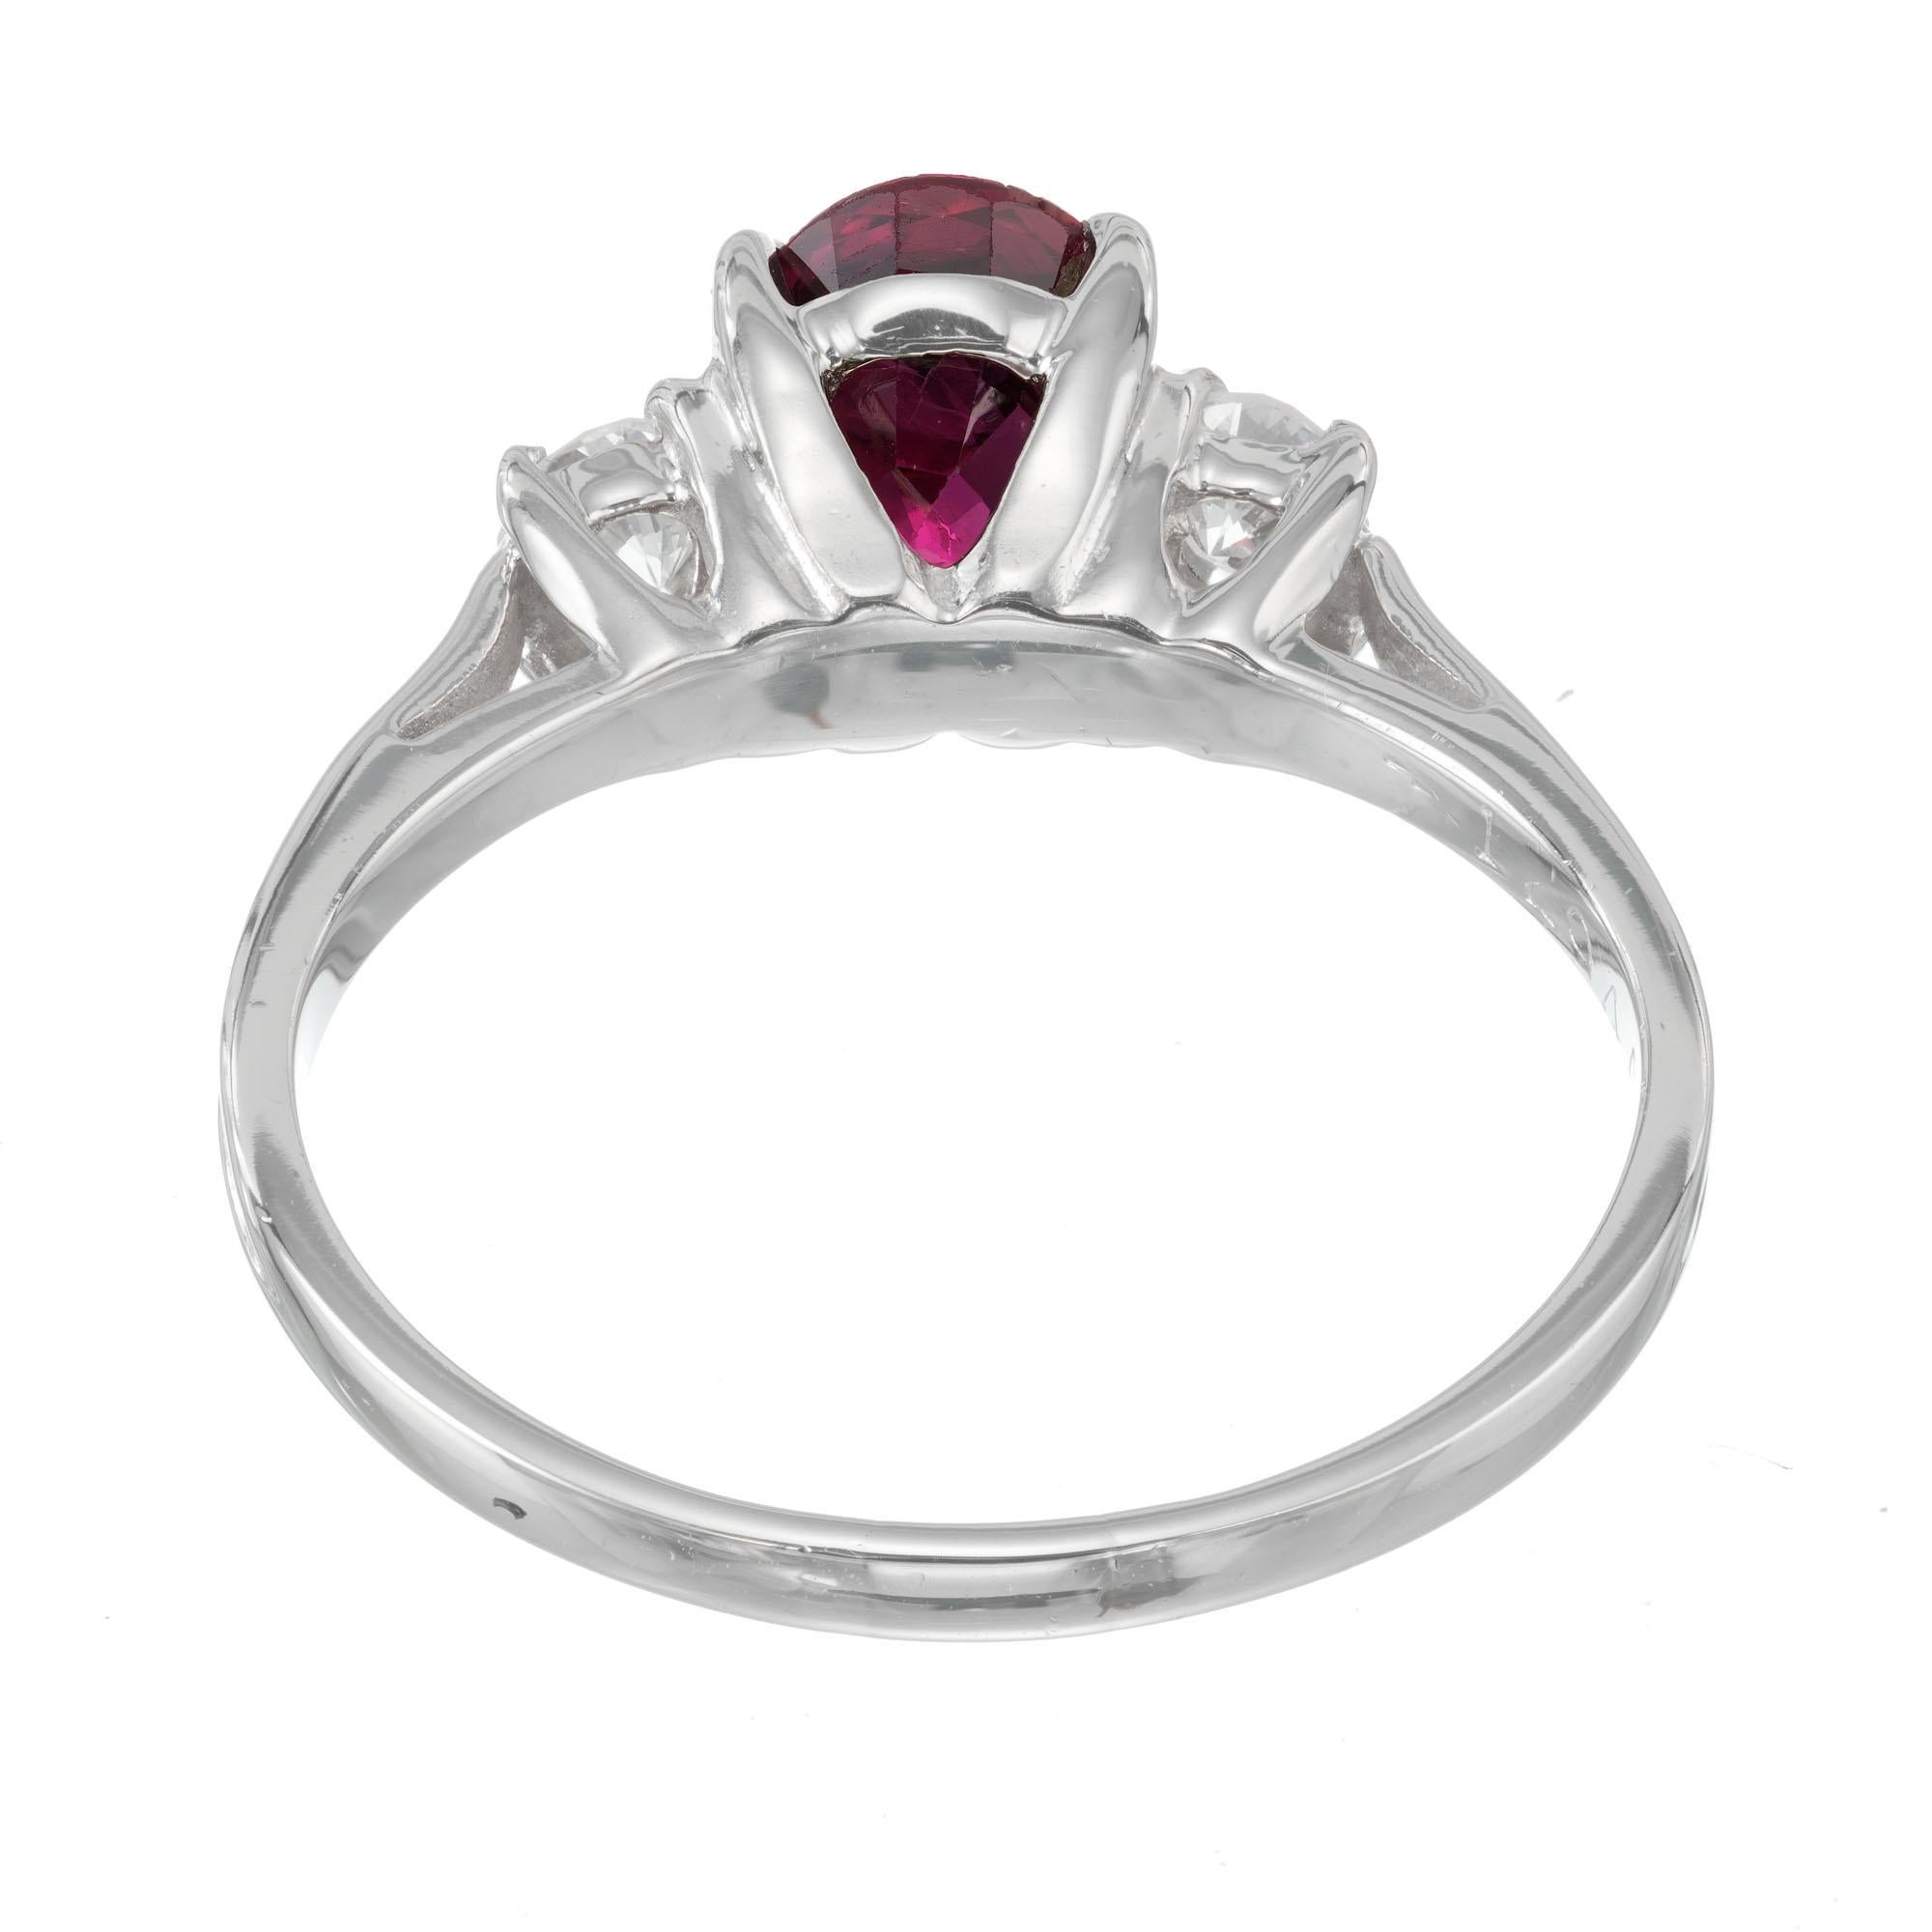 Women's 1.07 Carat Ruby Diamond White Gold Three-Stone Engagement Ring For Sale